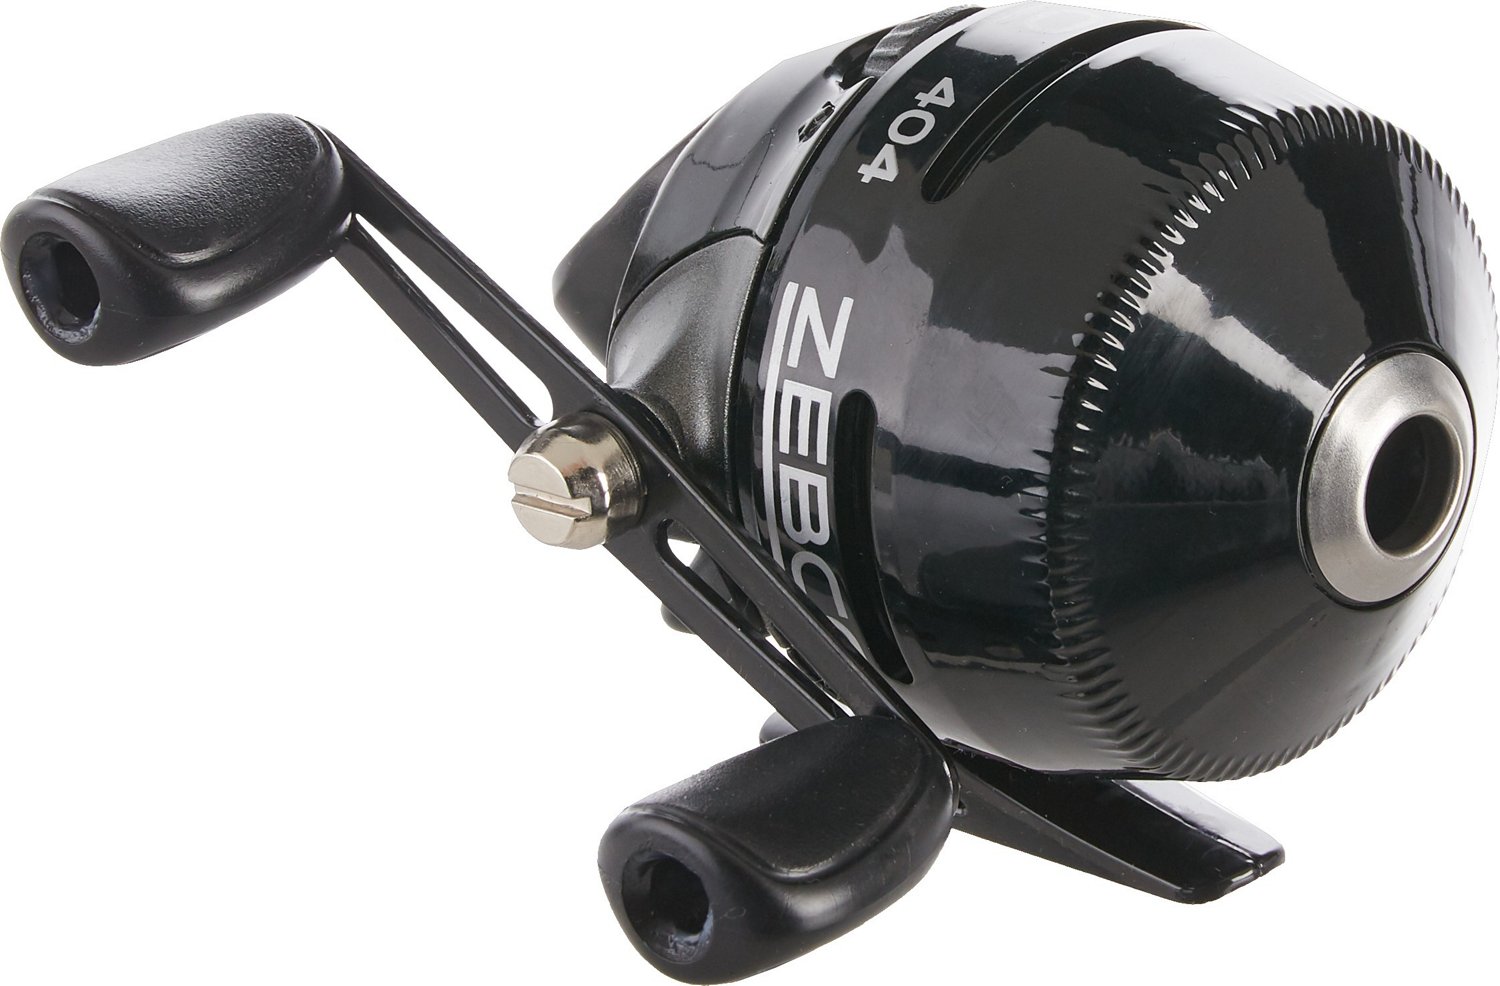  Zebco 404 Spincast Fishing Reel, Size 40 Reel, Right-Hand  Retrieve, Built-in Bite Alert, Durable All-Metal Gears, Stainless Steel  Pick-up Pin, Pre-Spooled